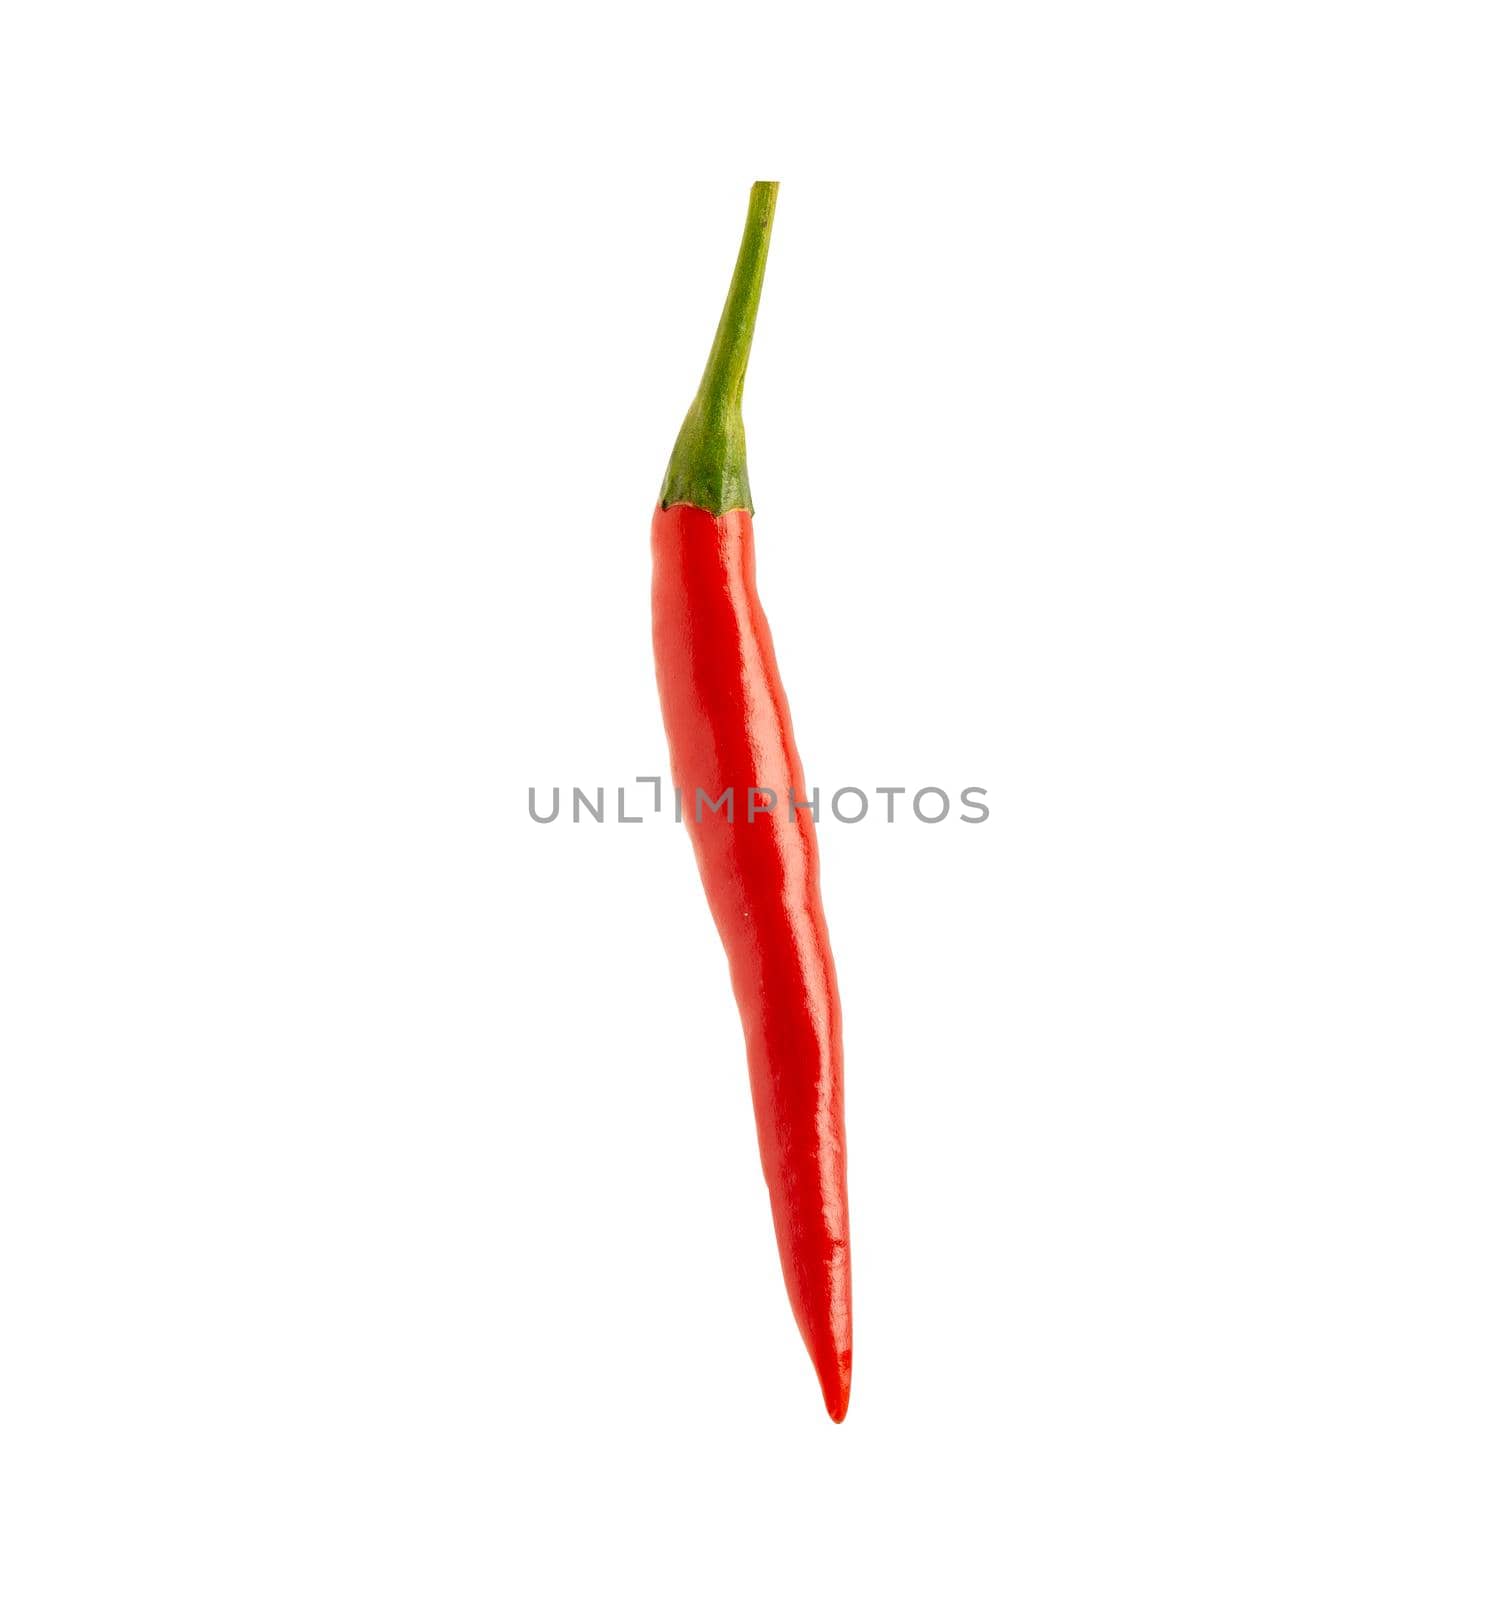 Pepper or chili red and hot vegetable isolated on white background with clipping path.